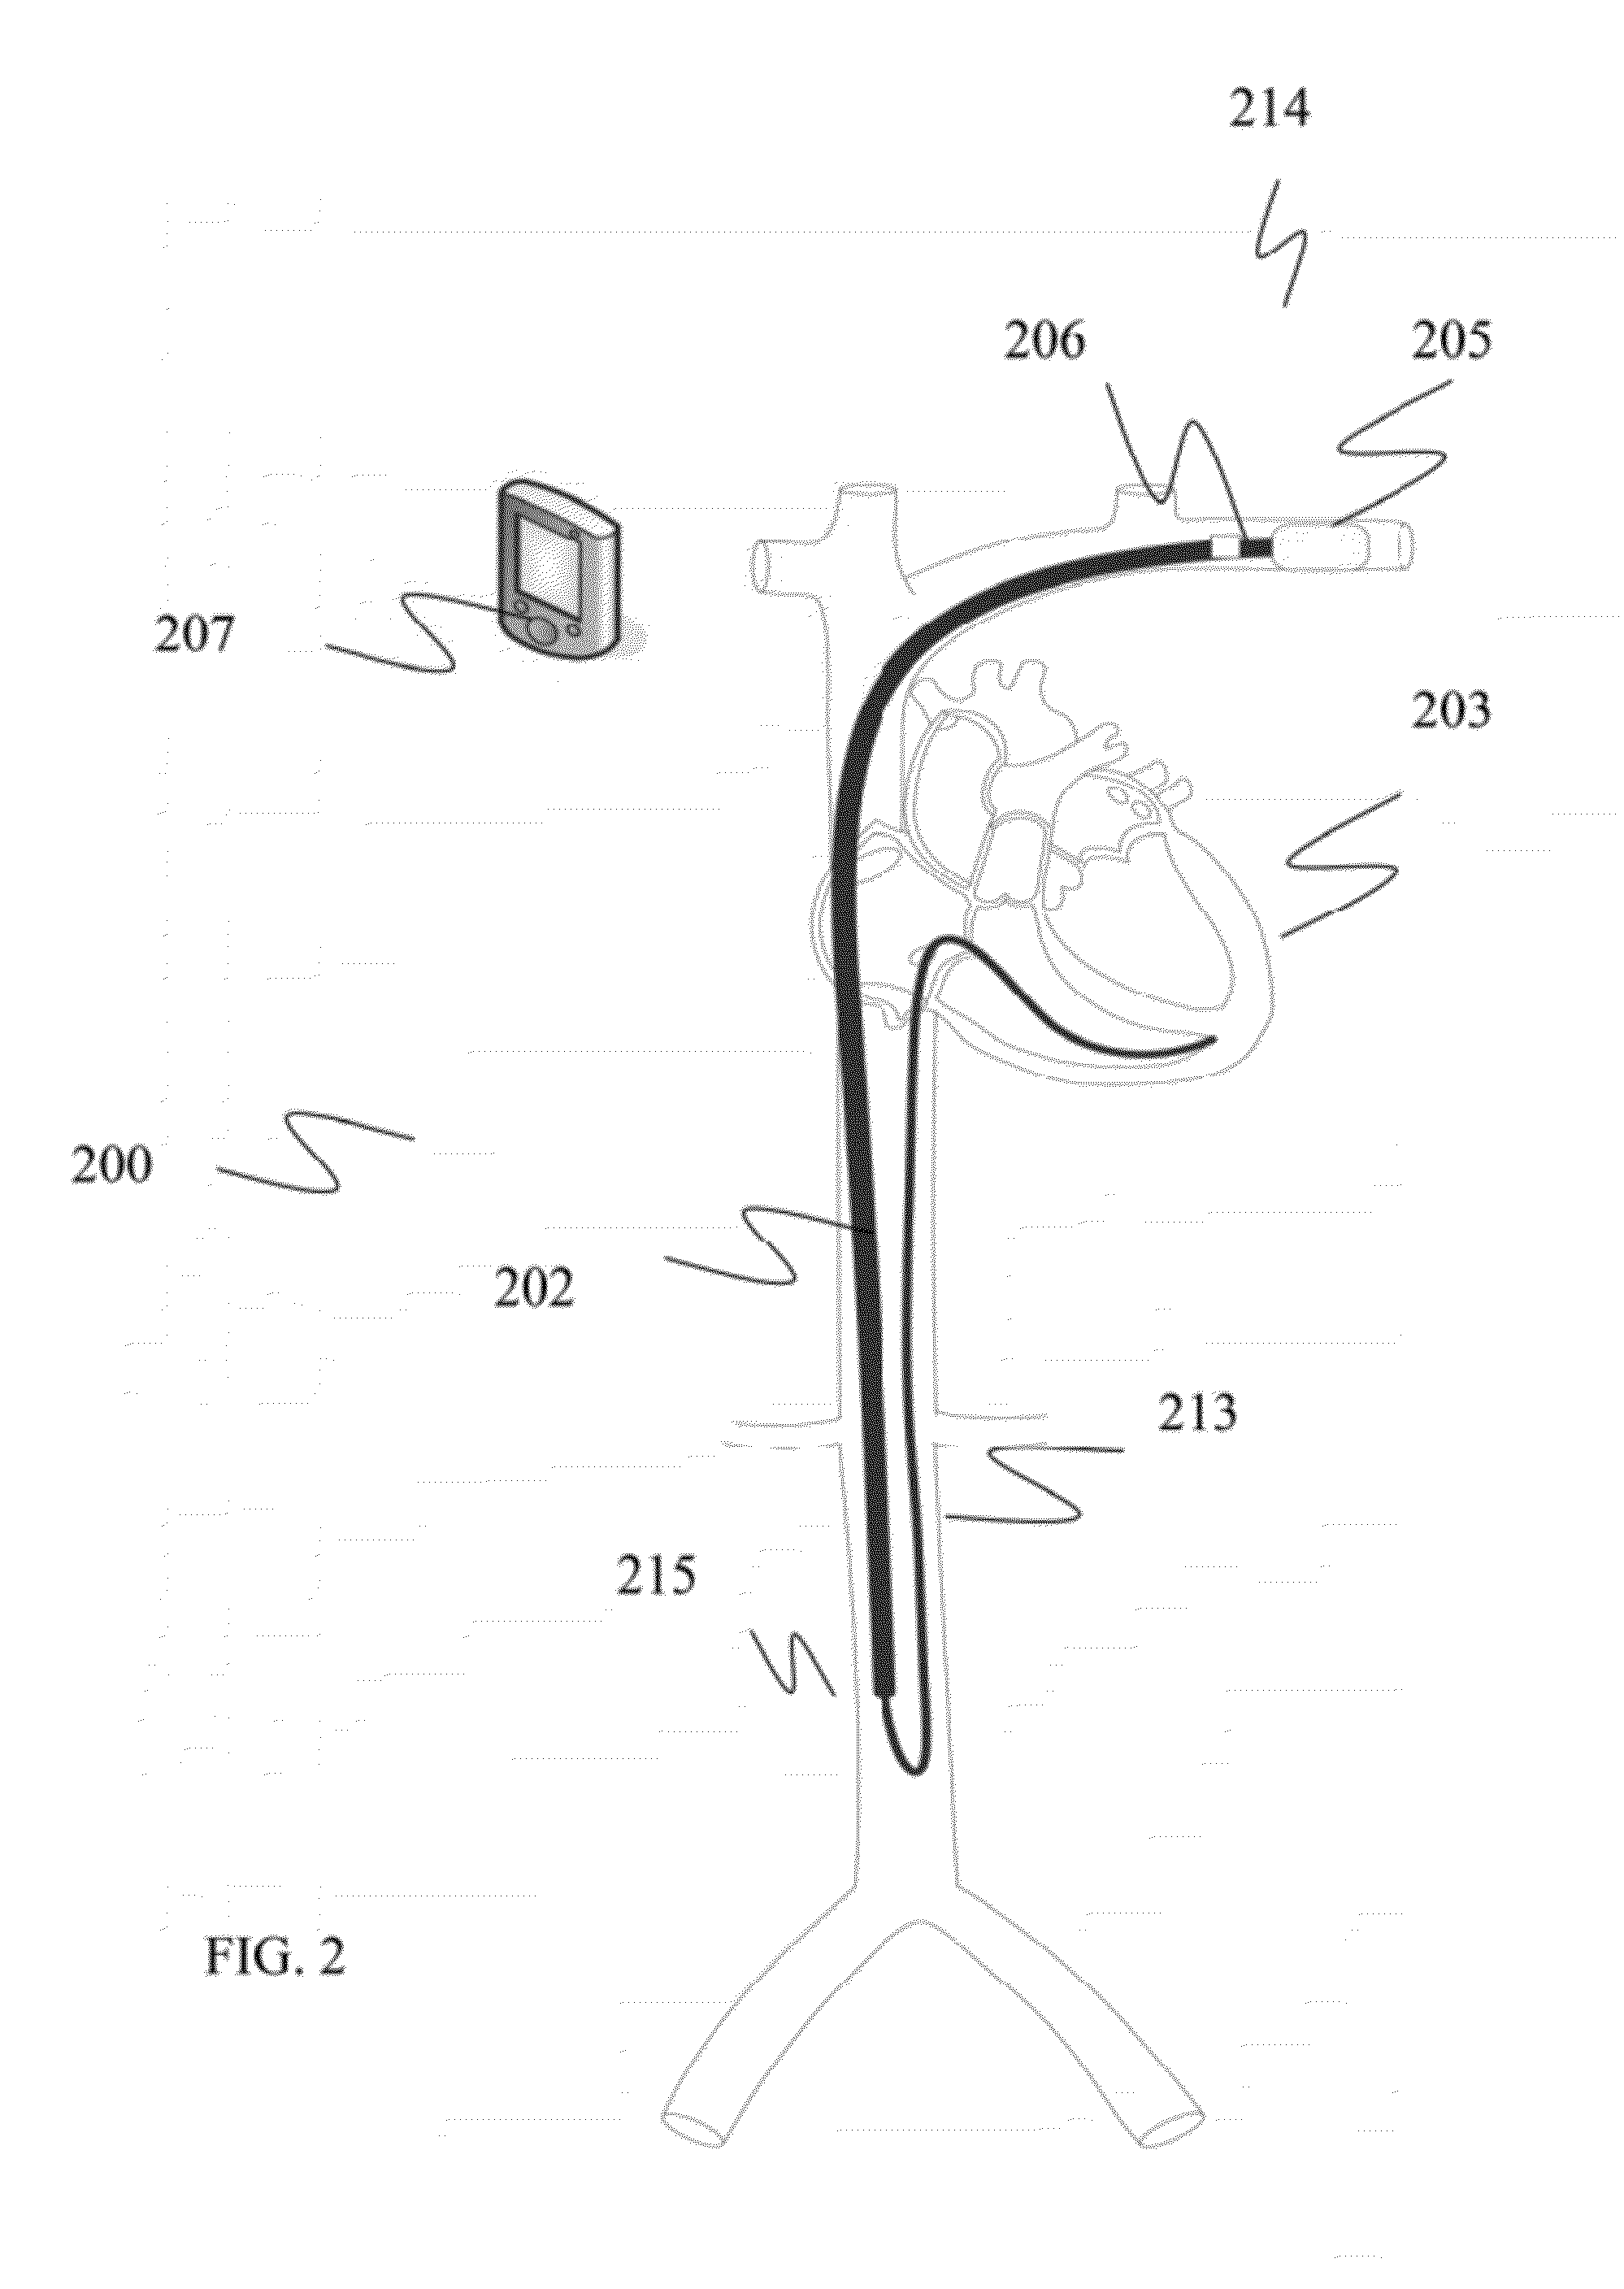 Dislodgement detector for intravascular implantable medical device